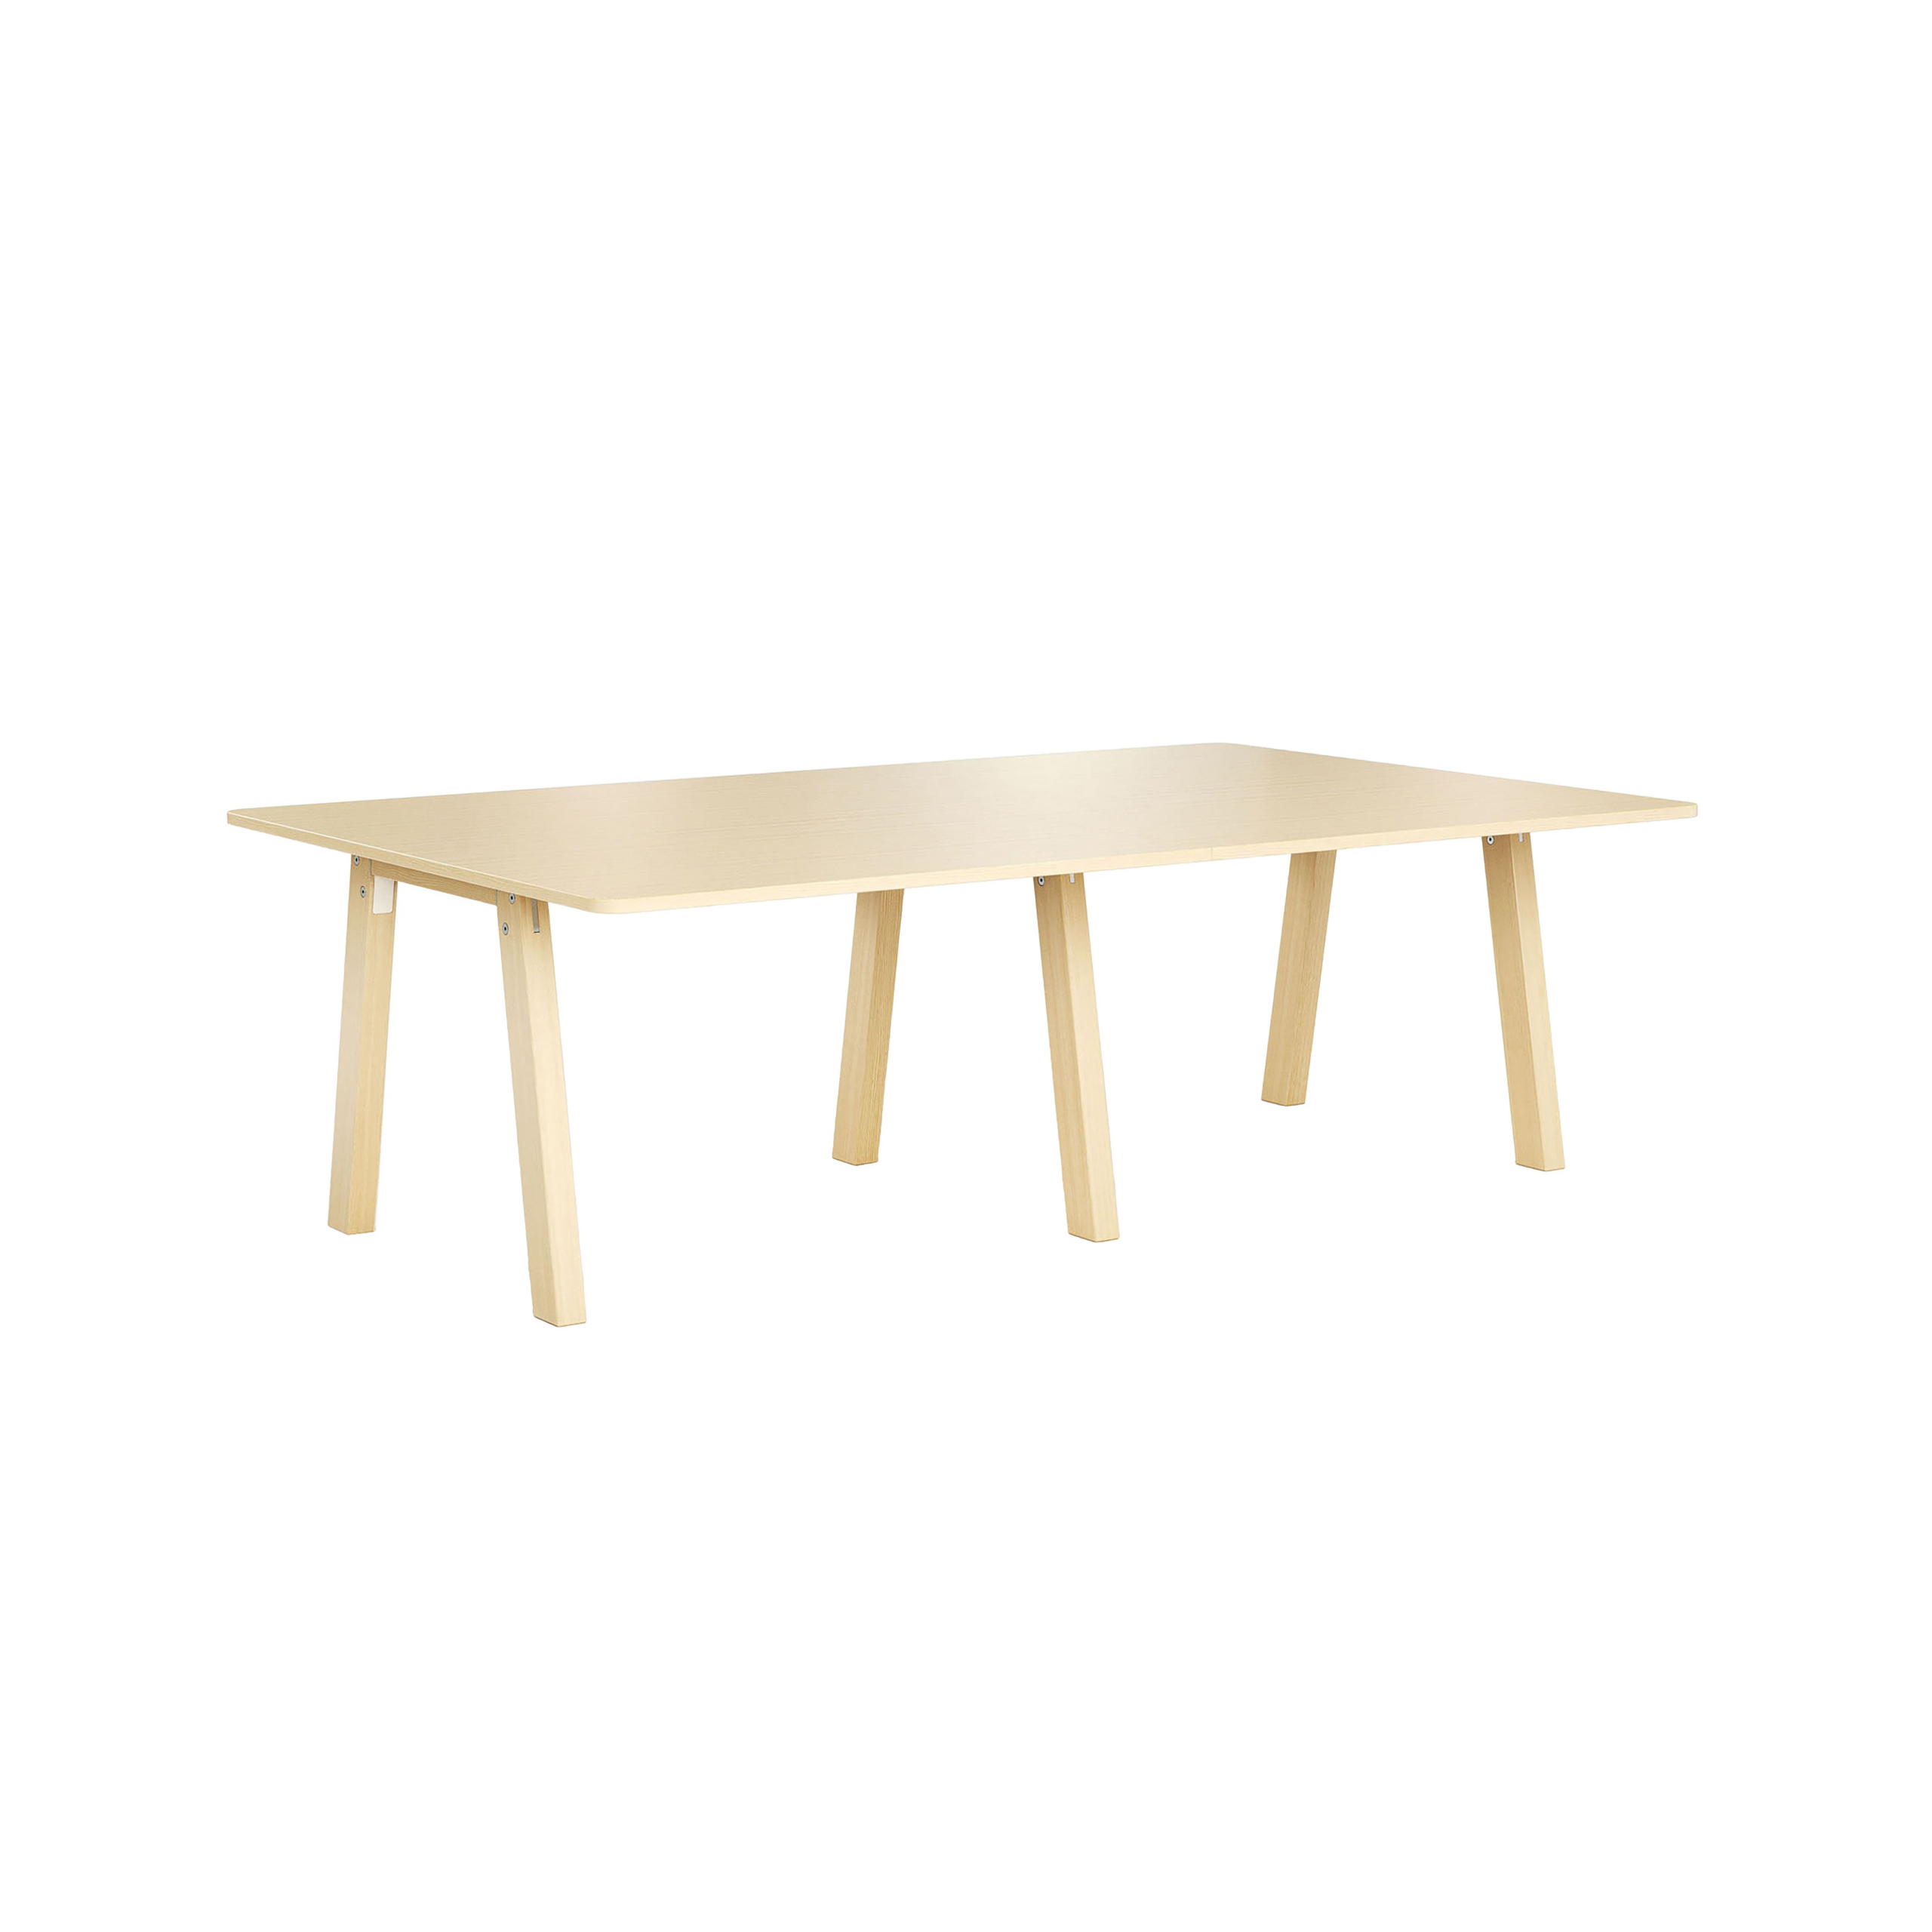 Collaborate Meeting table with wooden legs